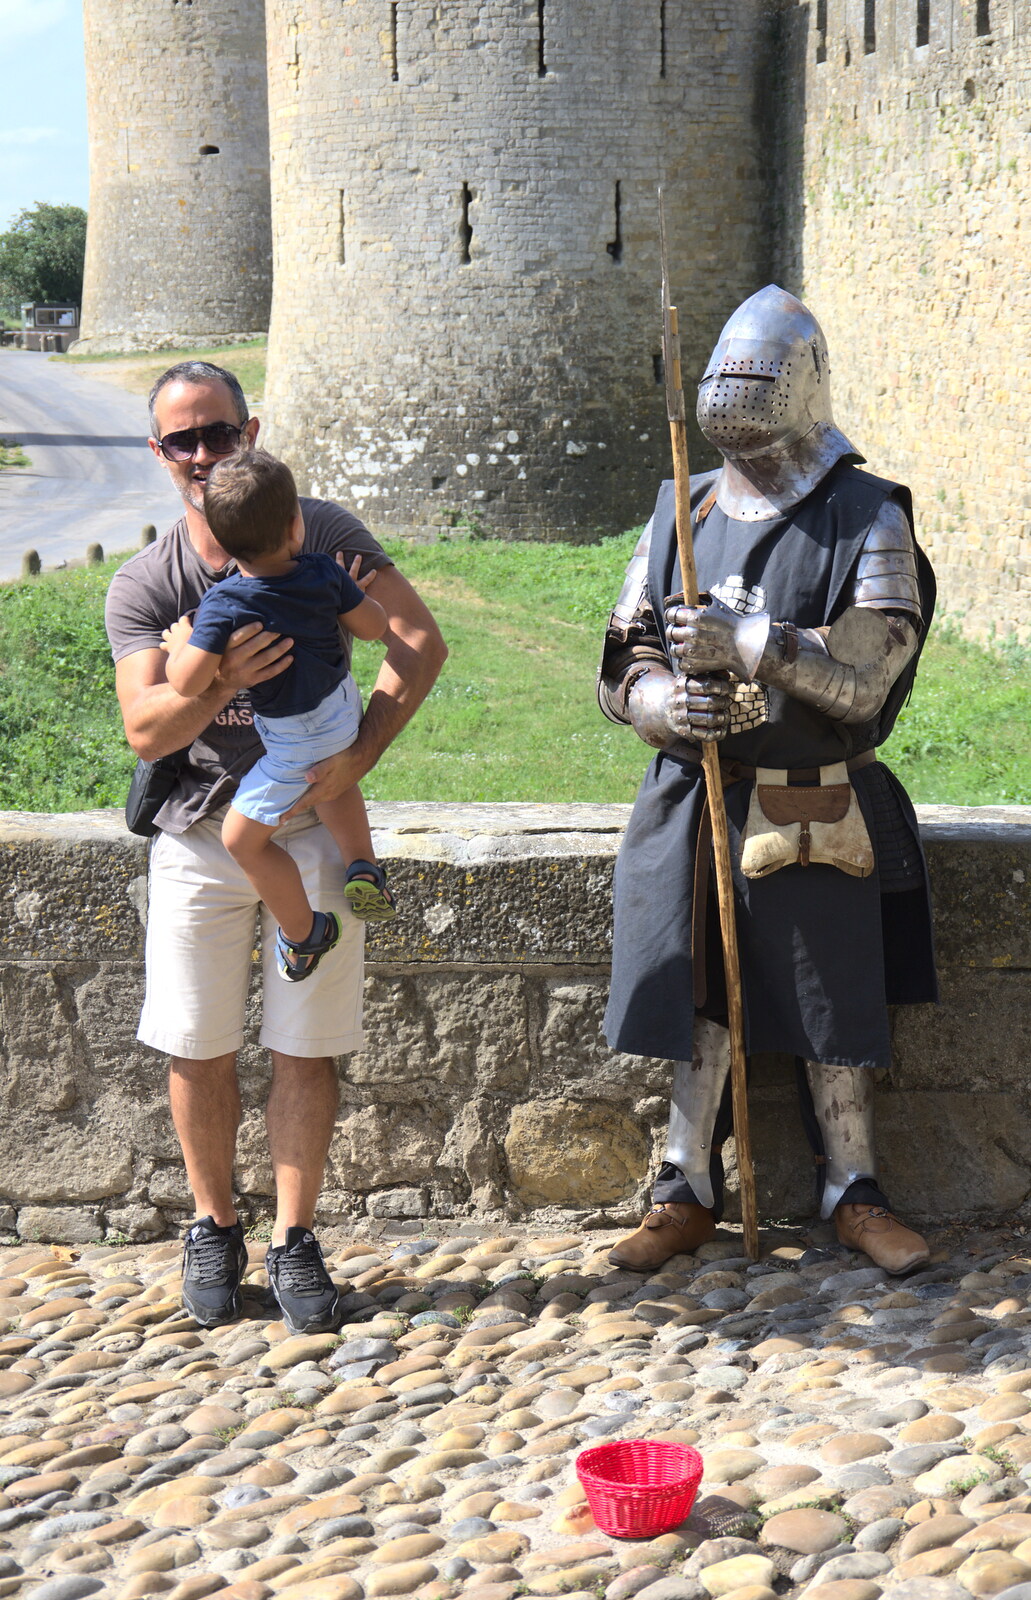 A knight in shining armour from A Trip to Carcassonne, Aude, France - 8th August 2018